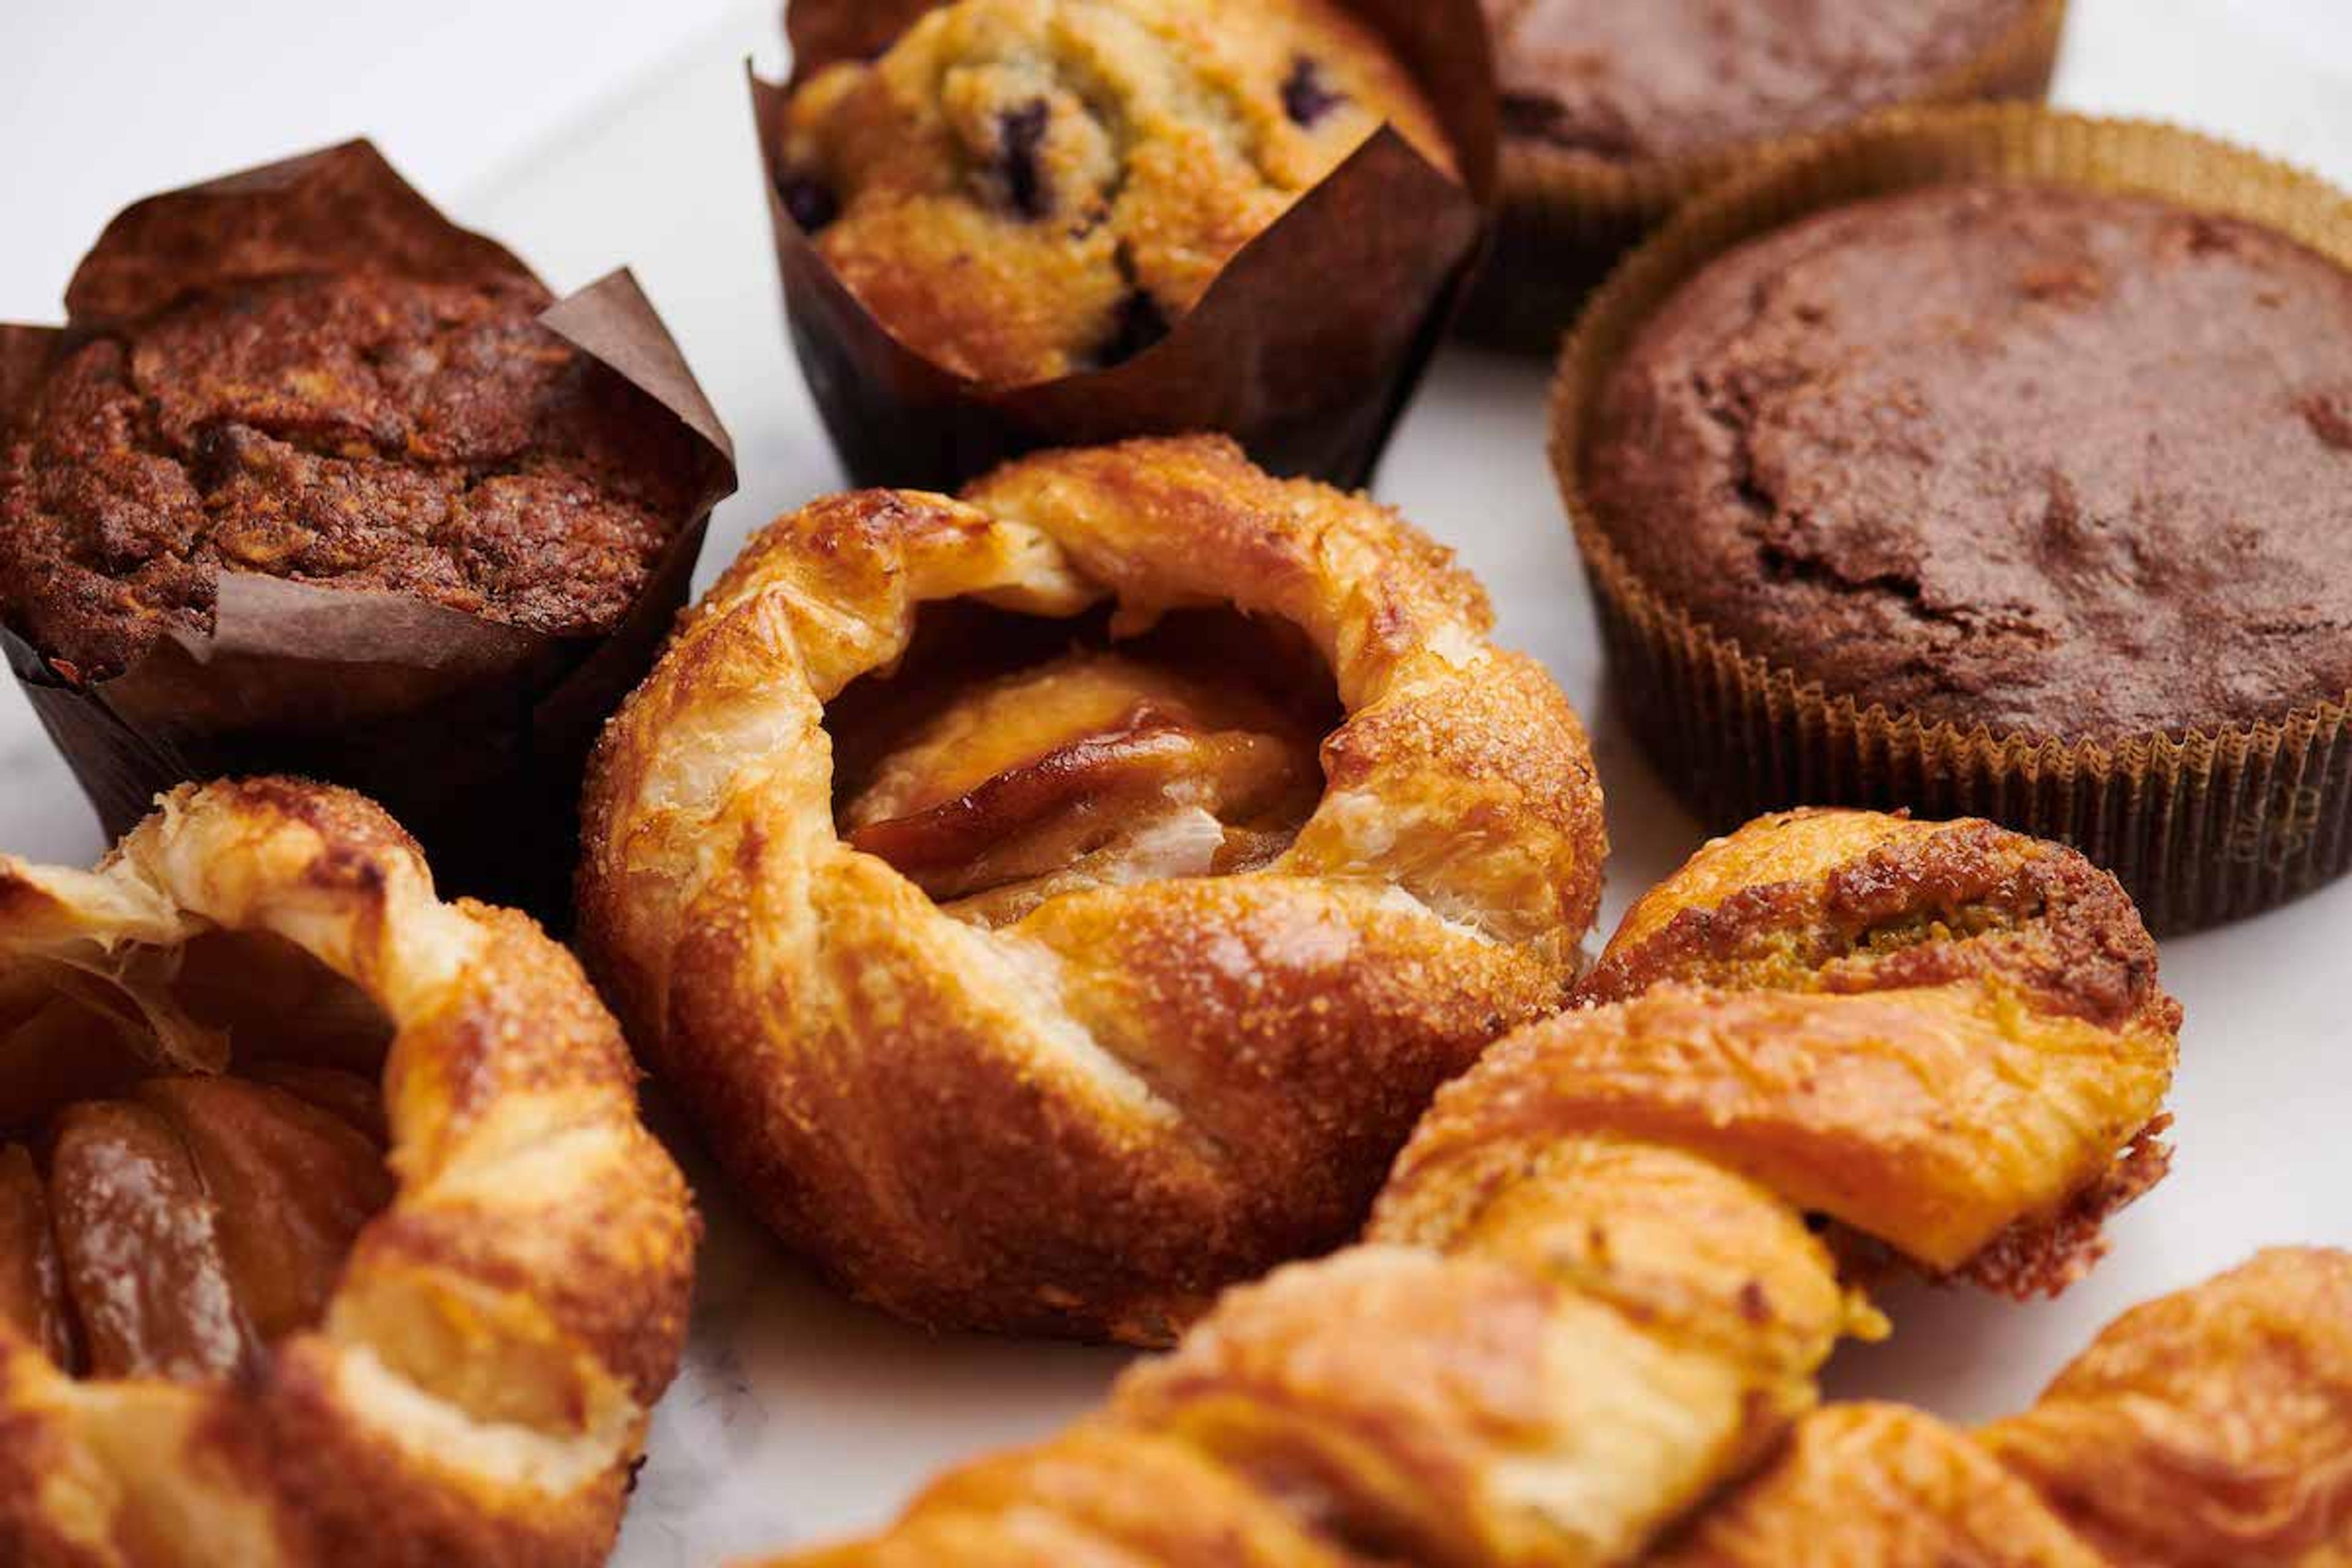 An assortment of pastries photographed against a white background.